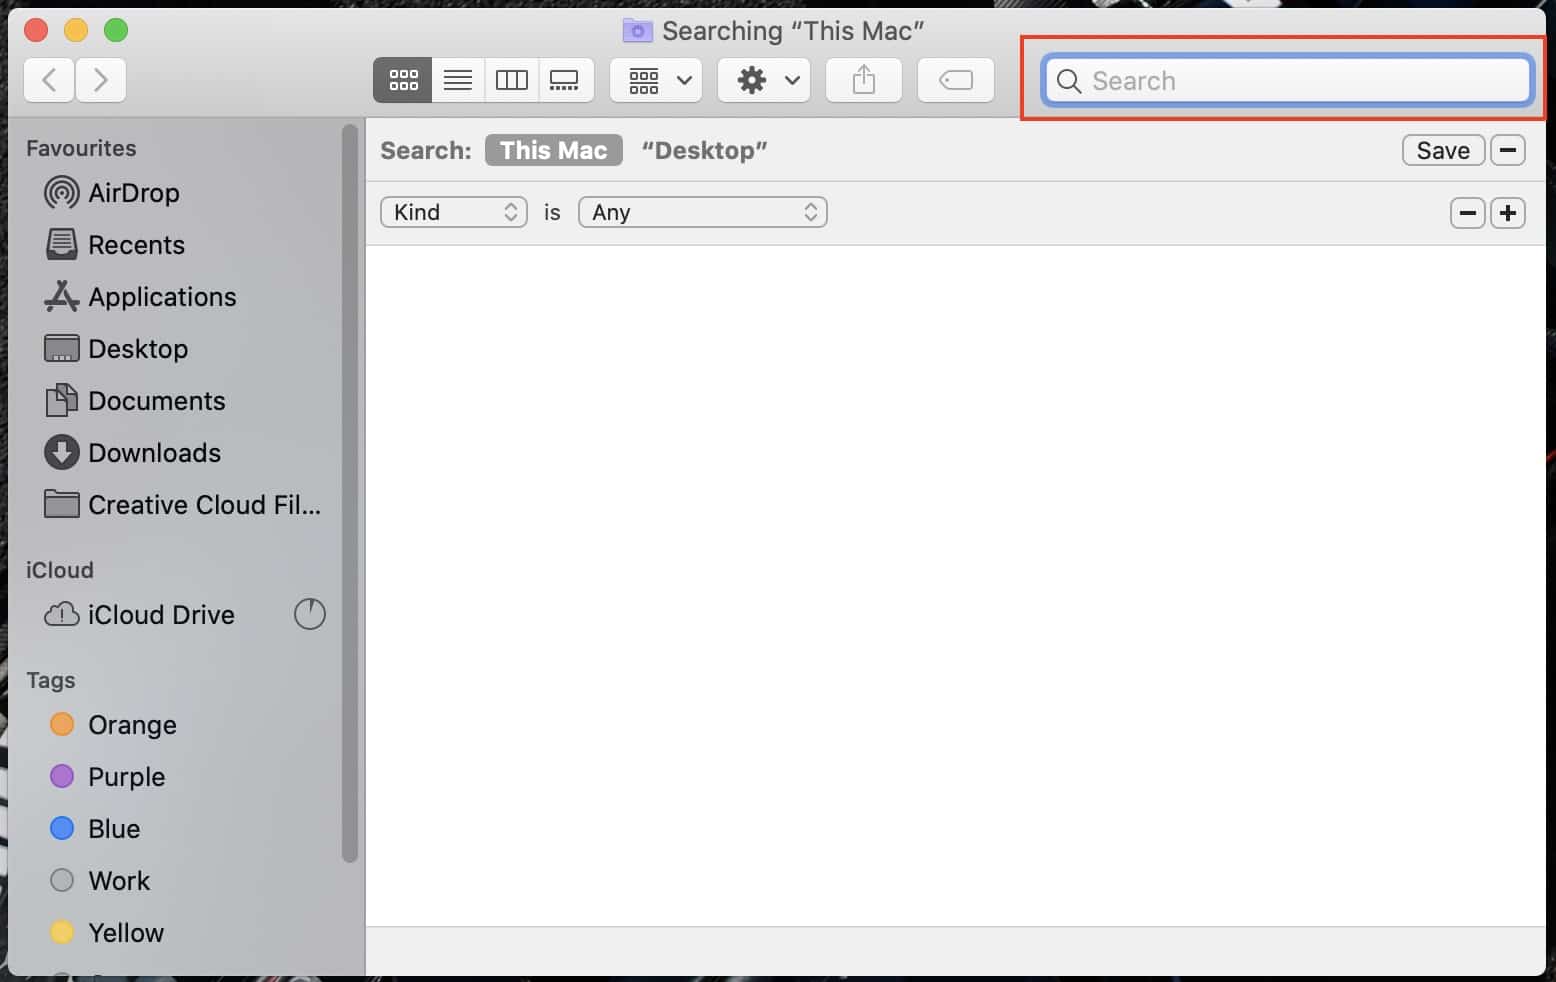 how to search for a file by typing its name on a Mac